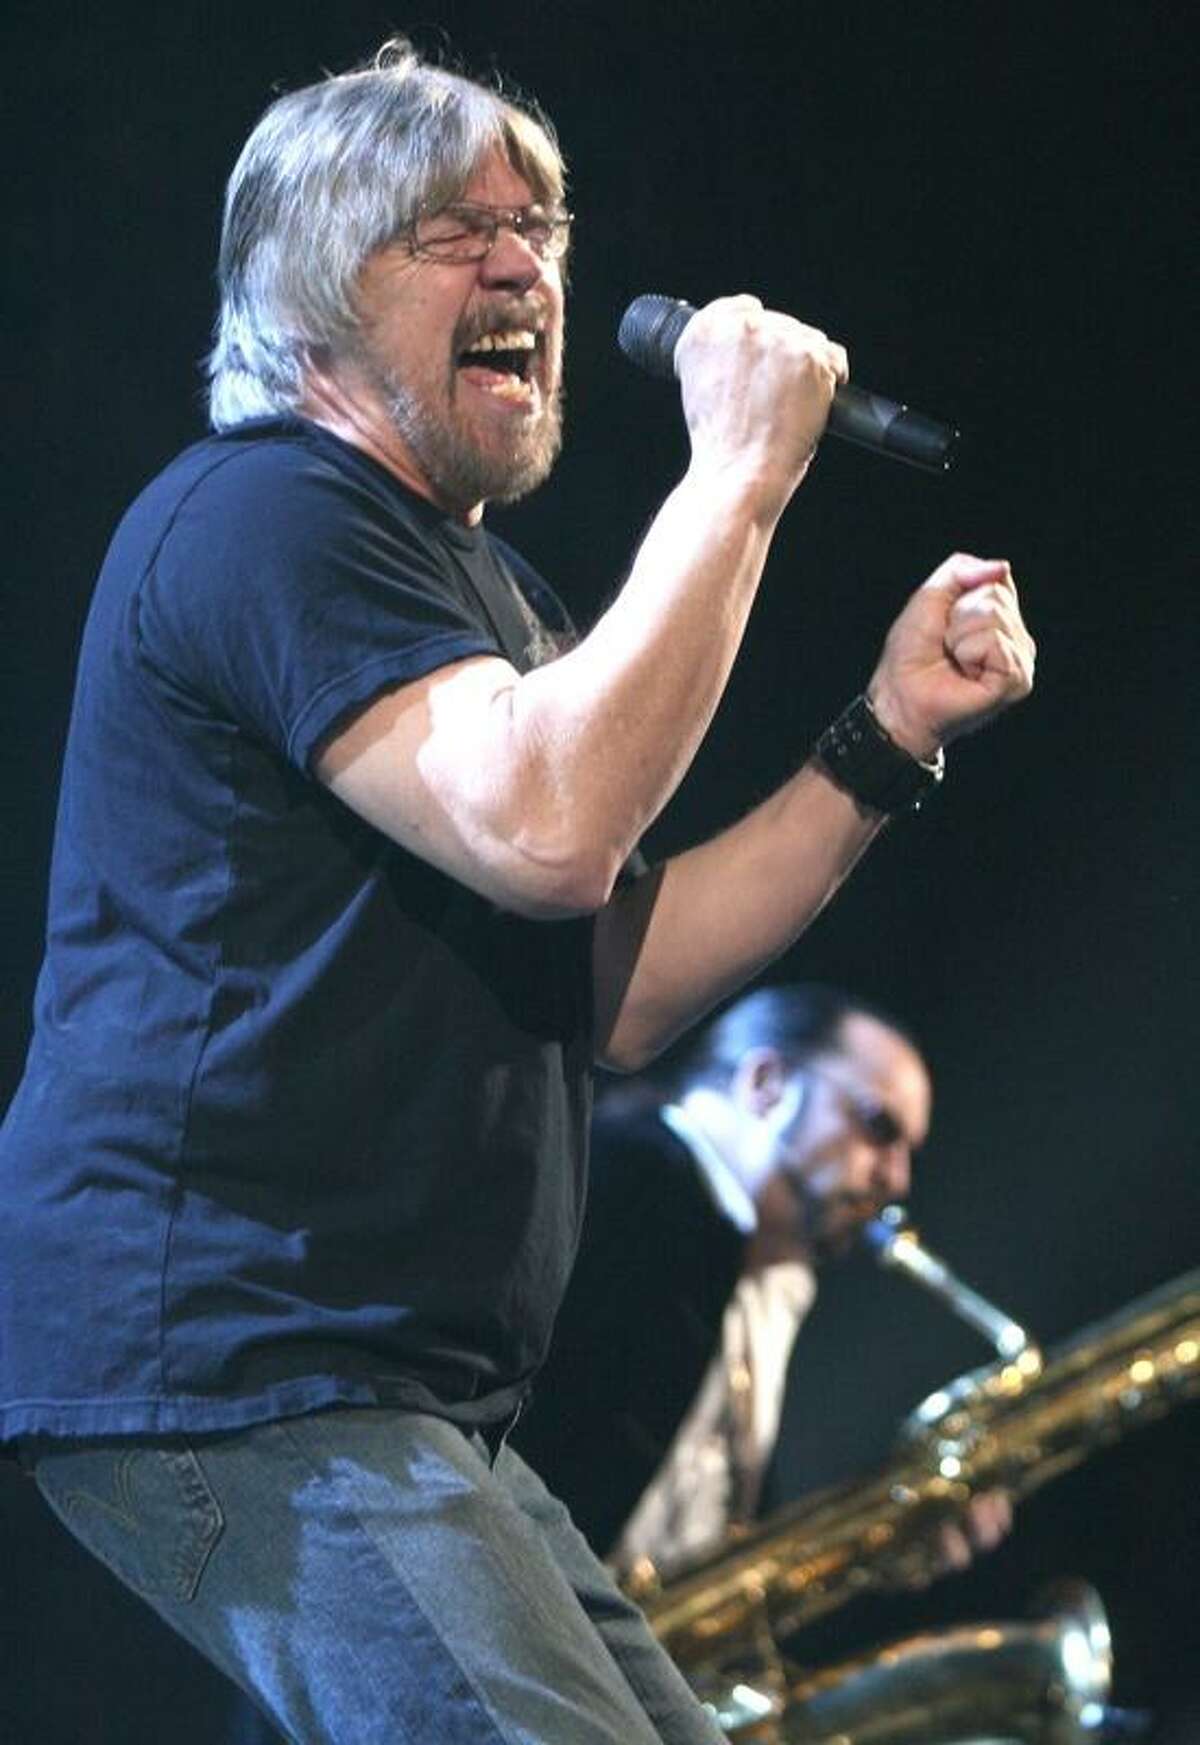 Rock musician, singer and songwriter Bob Seger is shown performing on stage during a "live" concert appearance.